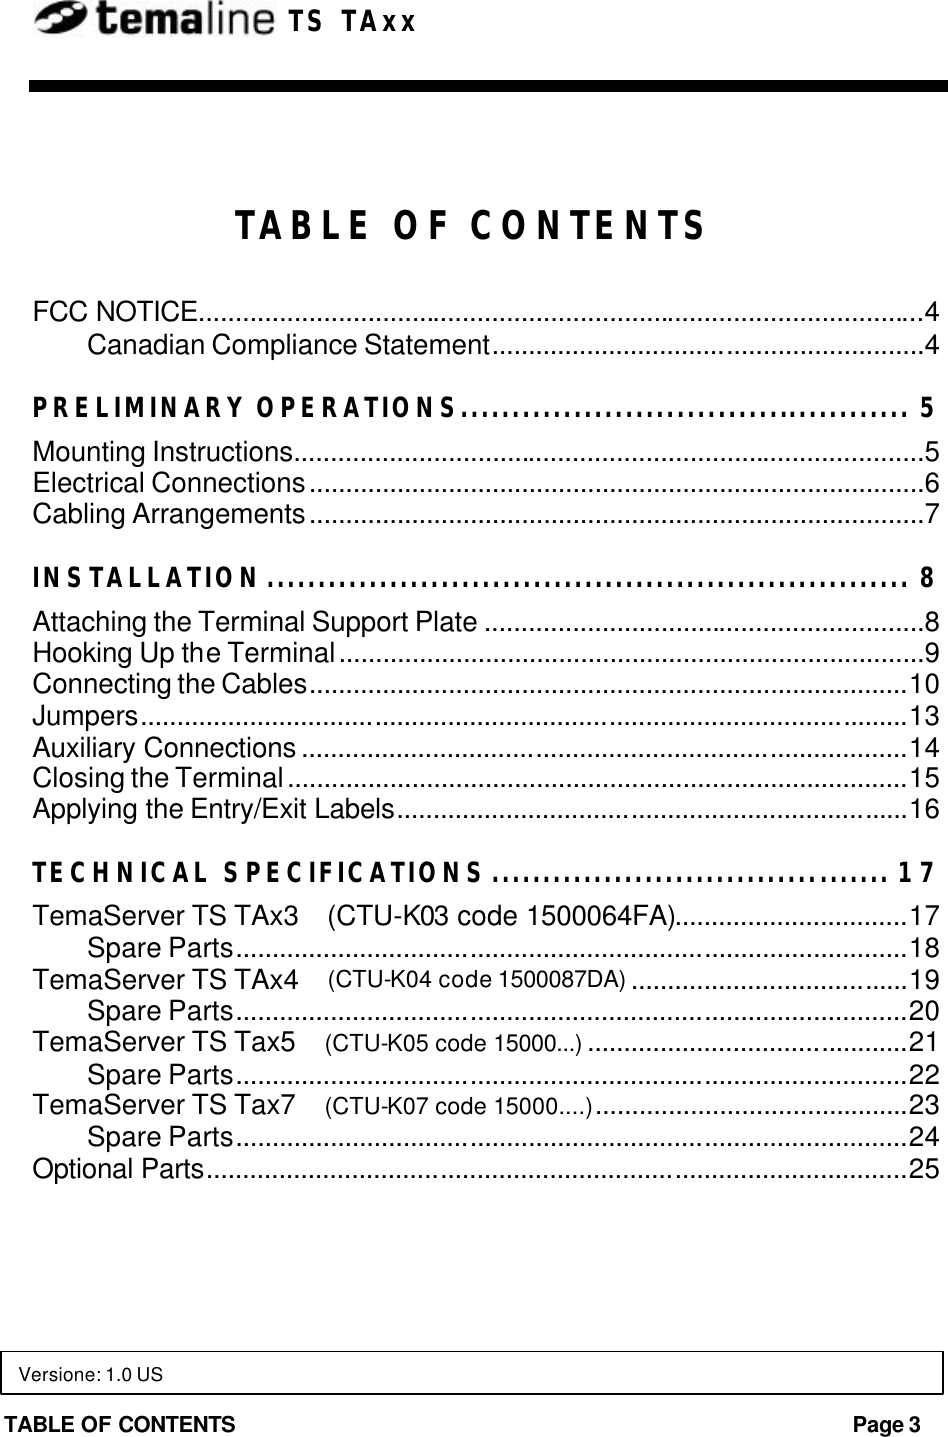 TABLE OF CONTENTS Page 3  TS TAxx  TABLE OF CONTENTS FCC NOTICE...................................................................................................4 Canadian Compliance Statement...........................................................4 PRELIMINARY OPERATIONS............................................ 5 Mounting Instructions......................................................................................5 Electrical Connections....................................................................................6 Cabling Arrangements....................................................................................7 INSTALLATION............................................................... 8 Attaching the Terminal Support Plate ............................................................8 Hooking Up the Terminal................................................................................9 Connecting the Cables..................................................................................10 Jumpers.........................................................................................................13 Auxiliary Connections ...................................................................................14 Closing the Terminal.....................................................................................15 Applying the Entry/Exit Labels......................................................................16 TECHNICAL SPECIFICATIONS....................................... 17 TemaServer TS TAx3    (CTU-K03 code 1500064FA)................................17 Spare Parts............................................................................................18 TemaServer TS TAx4    (CTU-K04 code 1500087DA) ......................................19 Spare Parts............................................................................................20 TemaServer TS Tax5    (CTU-K05 code 15000...) ............................................21 Spare Parts............................................................................................22 TemaServer TS Tax7    (CTU-K07 code 15000....)...........................................23 Spare Parts............................................................................................24 Optional Parts................................................................................................25  Versione: 1.0 US 